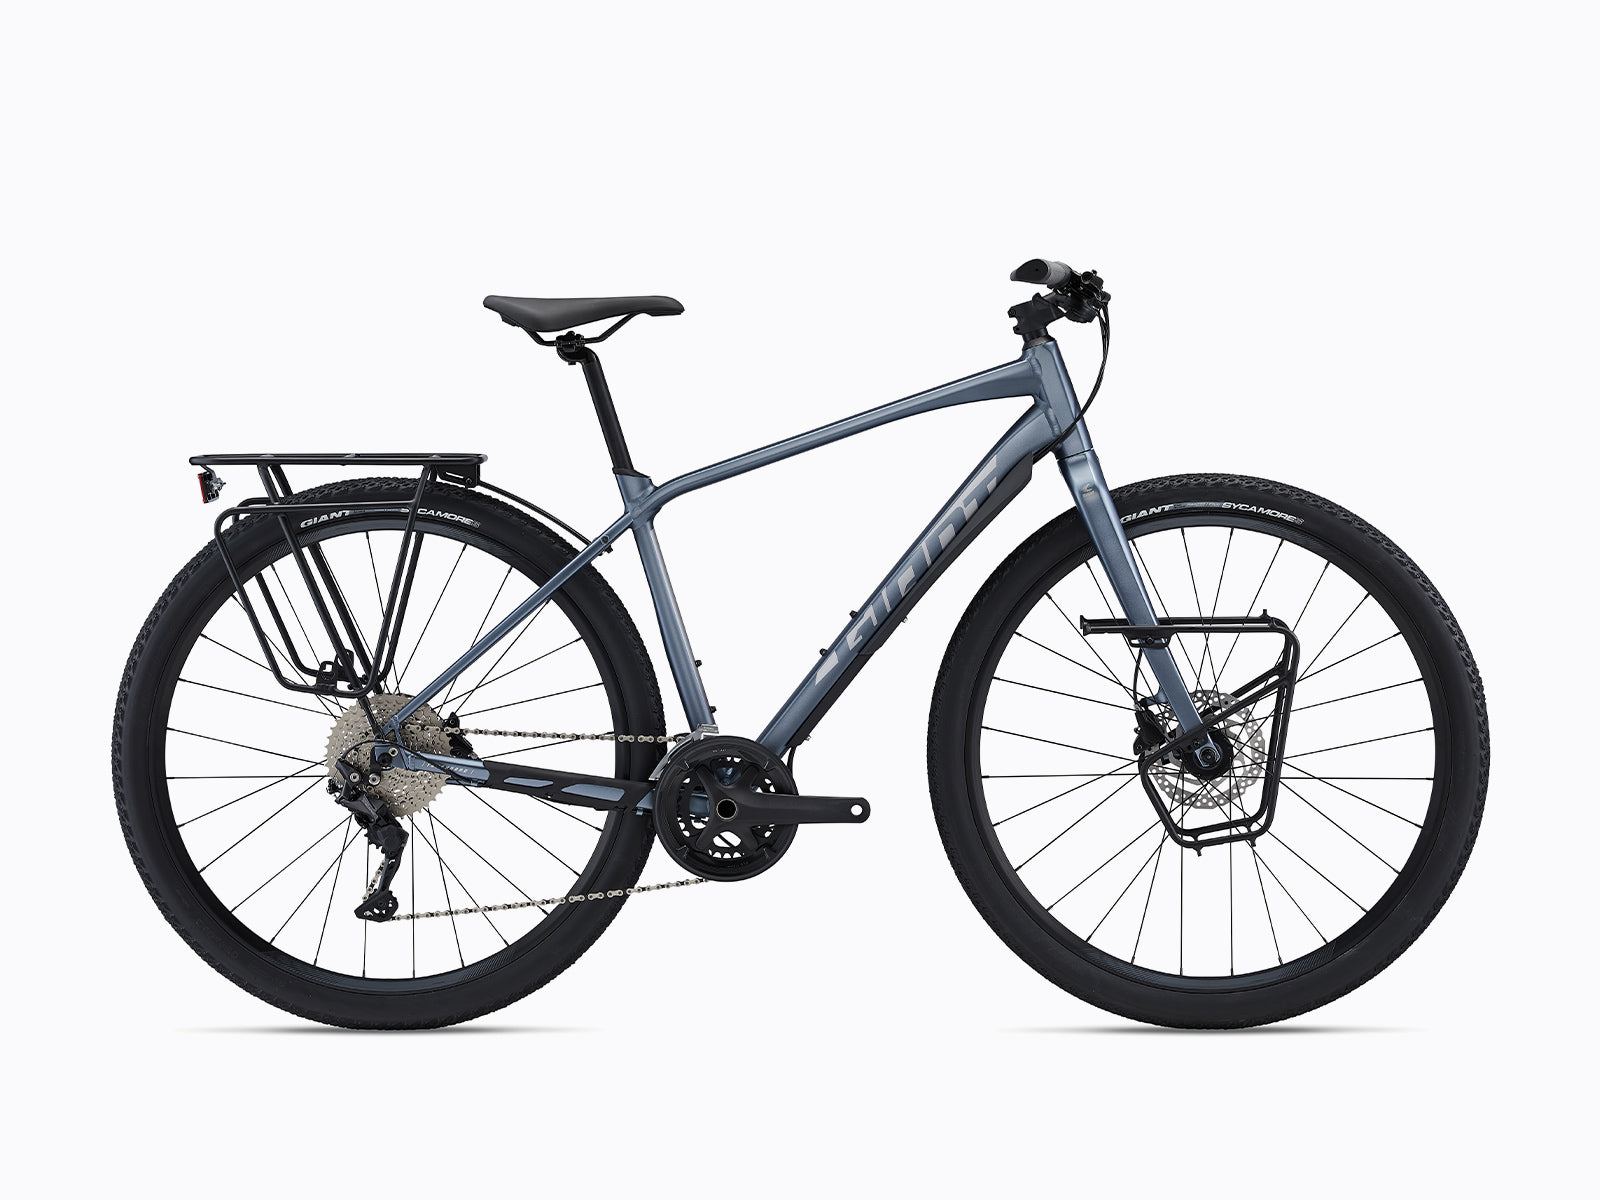 image features the Giant ToughRoad SLR 1, an urban bike from Giant's commuter cycles collection. Now available at Giant Melbourne, a bike shop in Australia